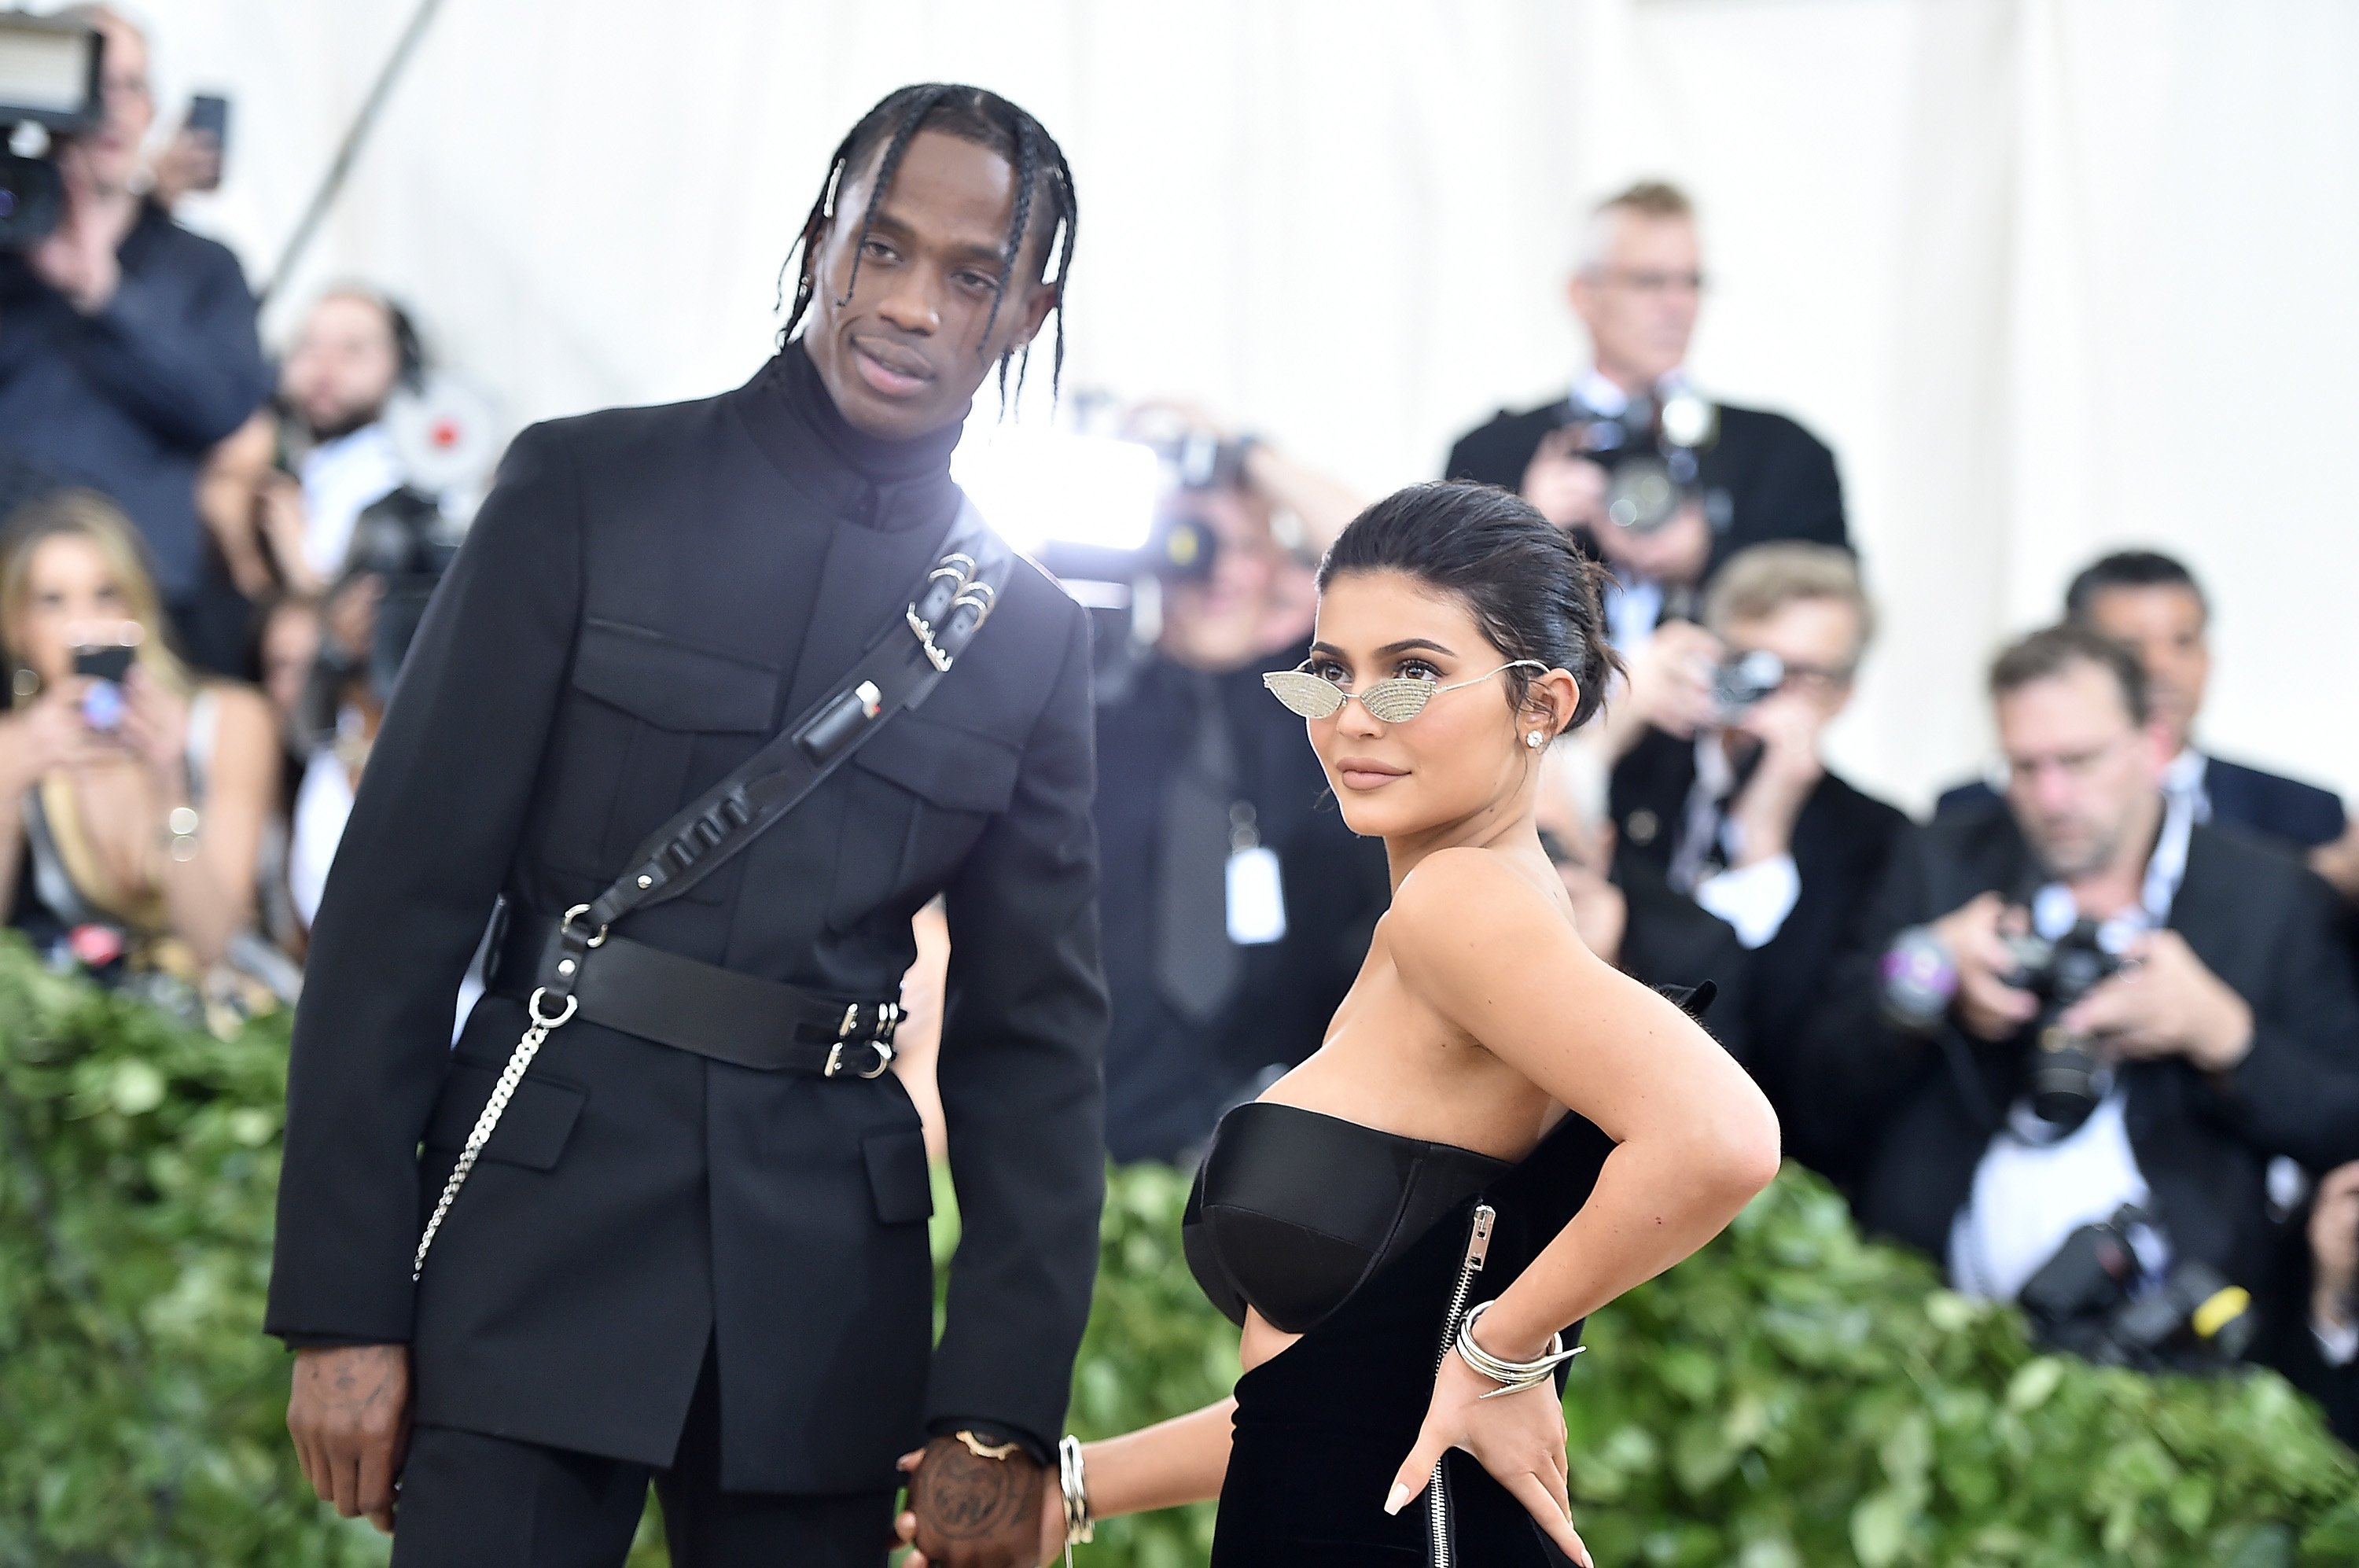 Travis Scott and Kylie Jenner at the Met Gala on May 7, 2018 in New York City | Photo: Getty Images